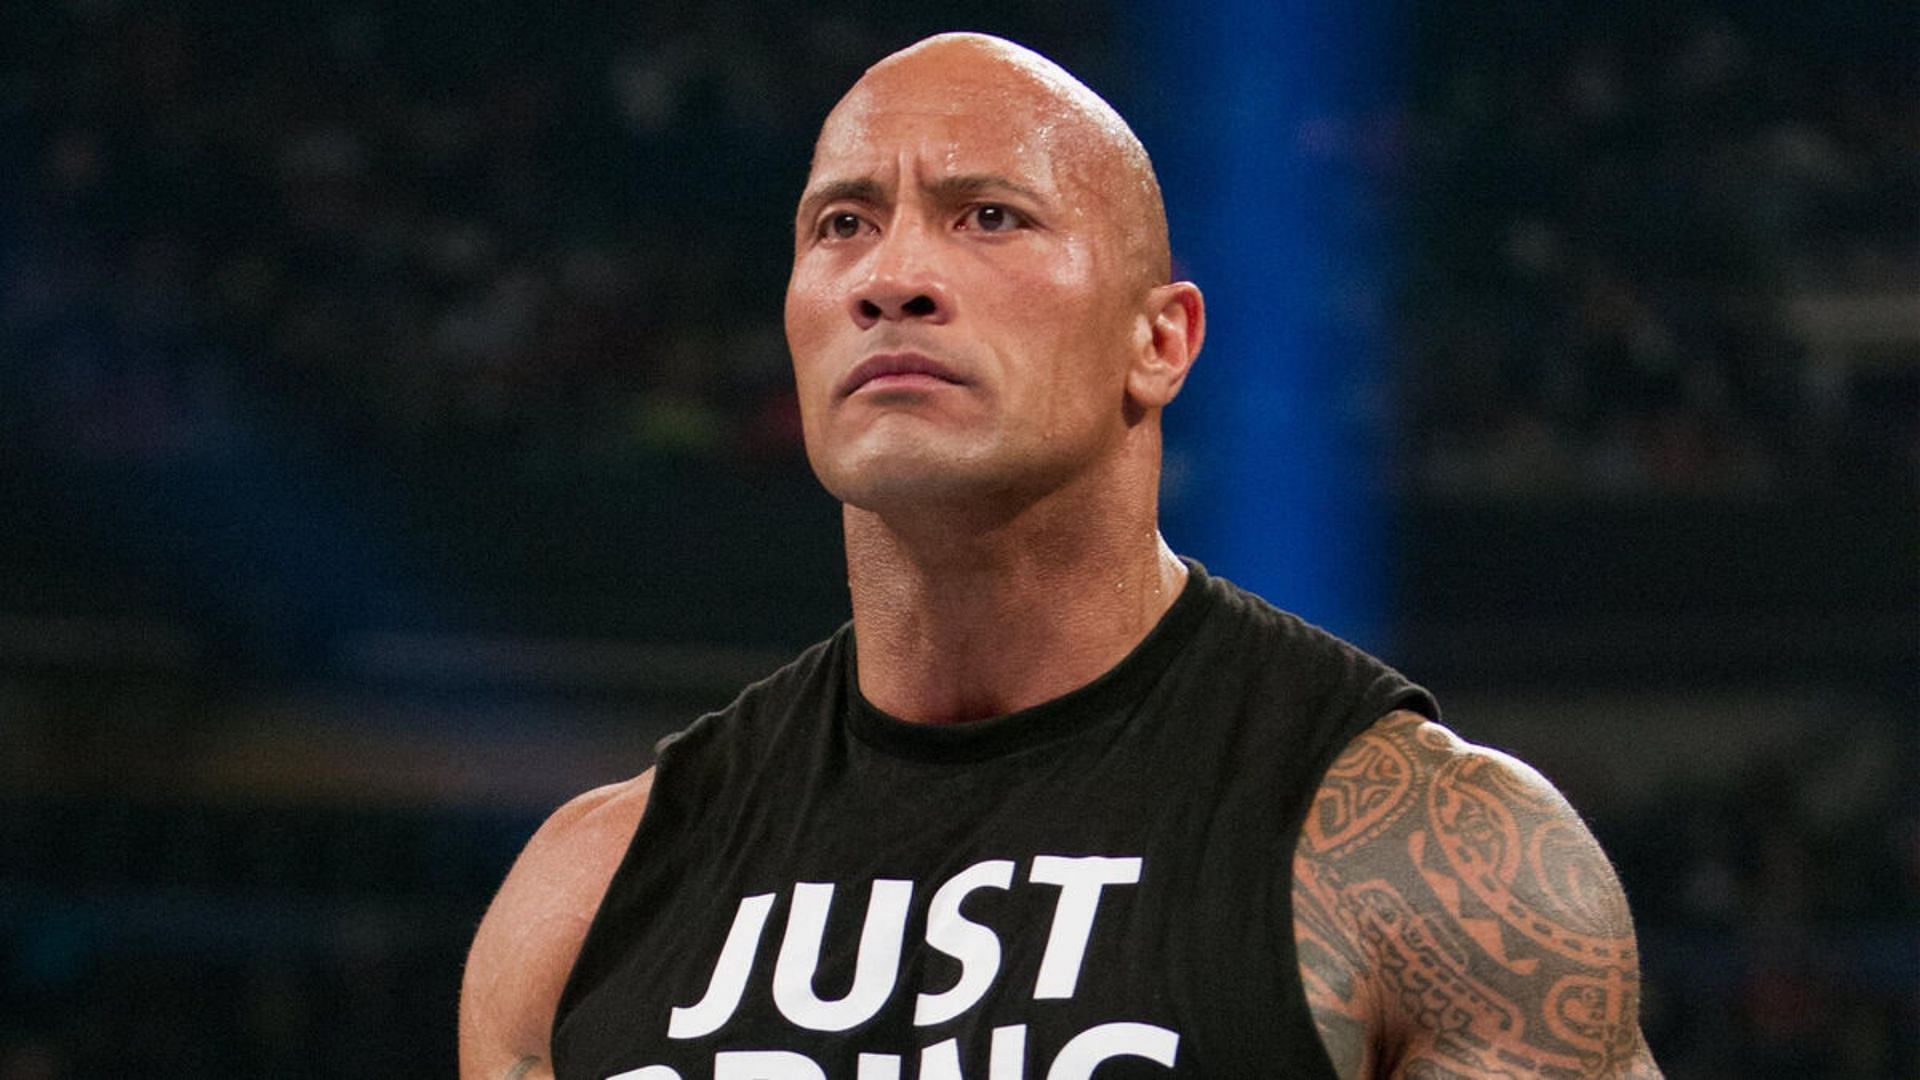 The Rock will compete at WWE WrestleMania XL